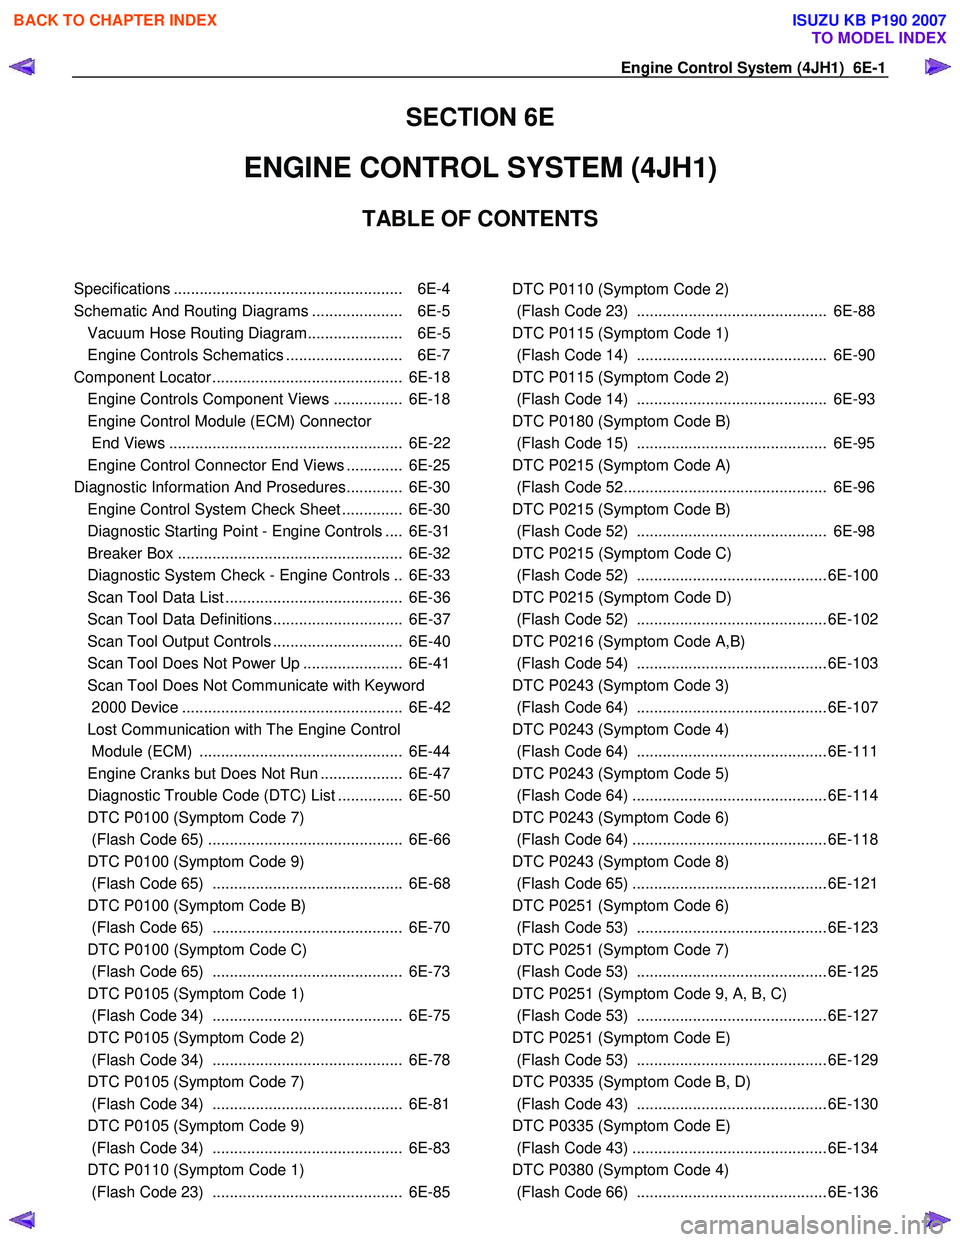 ISUZU KB P190 2007  Workshop Repair Manual Engine Control System (4JH1)  6E-1 
SECTION 6E 
ENGINE CONTROL SYSTEM (4JH1)  
TABLE OF CONTENTS 
  
 
Specifications ..................................................... 6E-4 
Schematic And Routing 